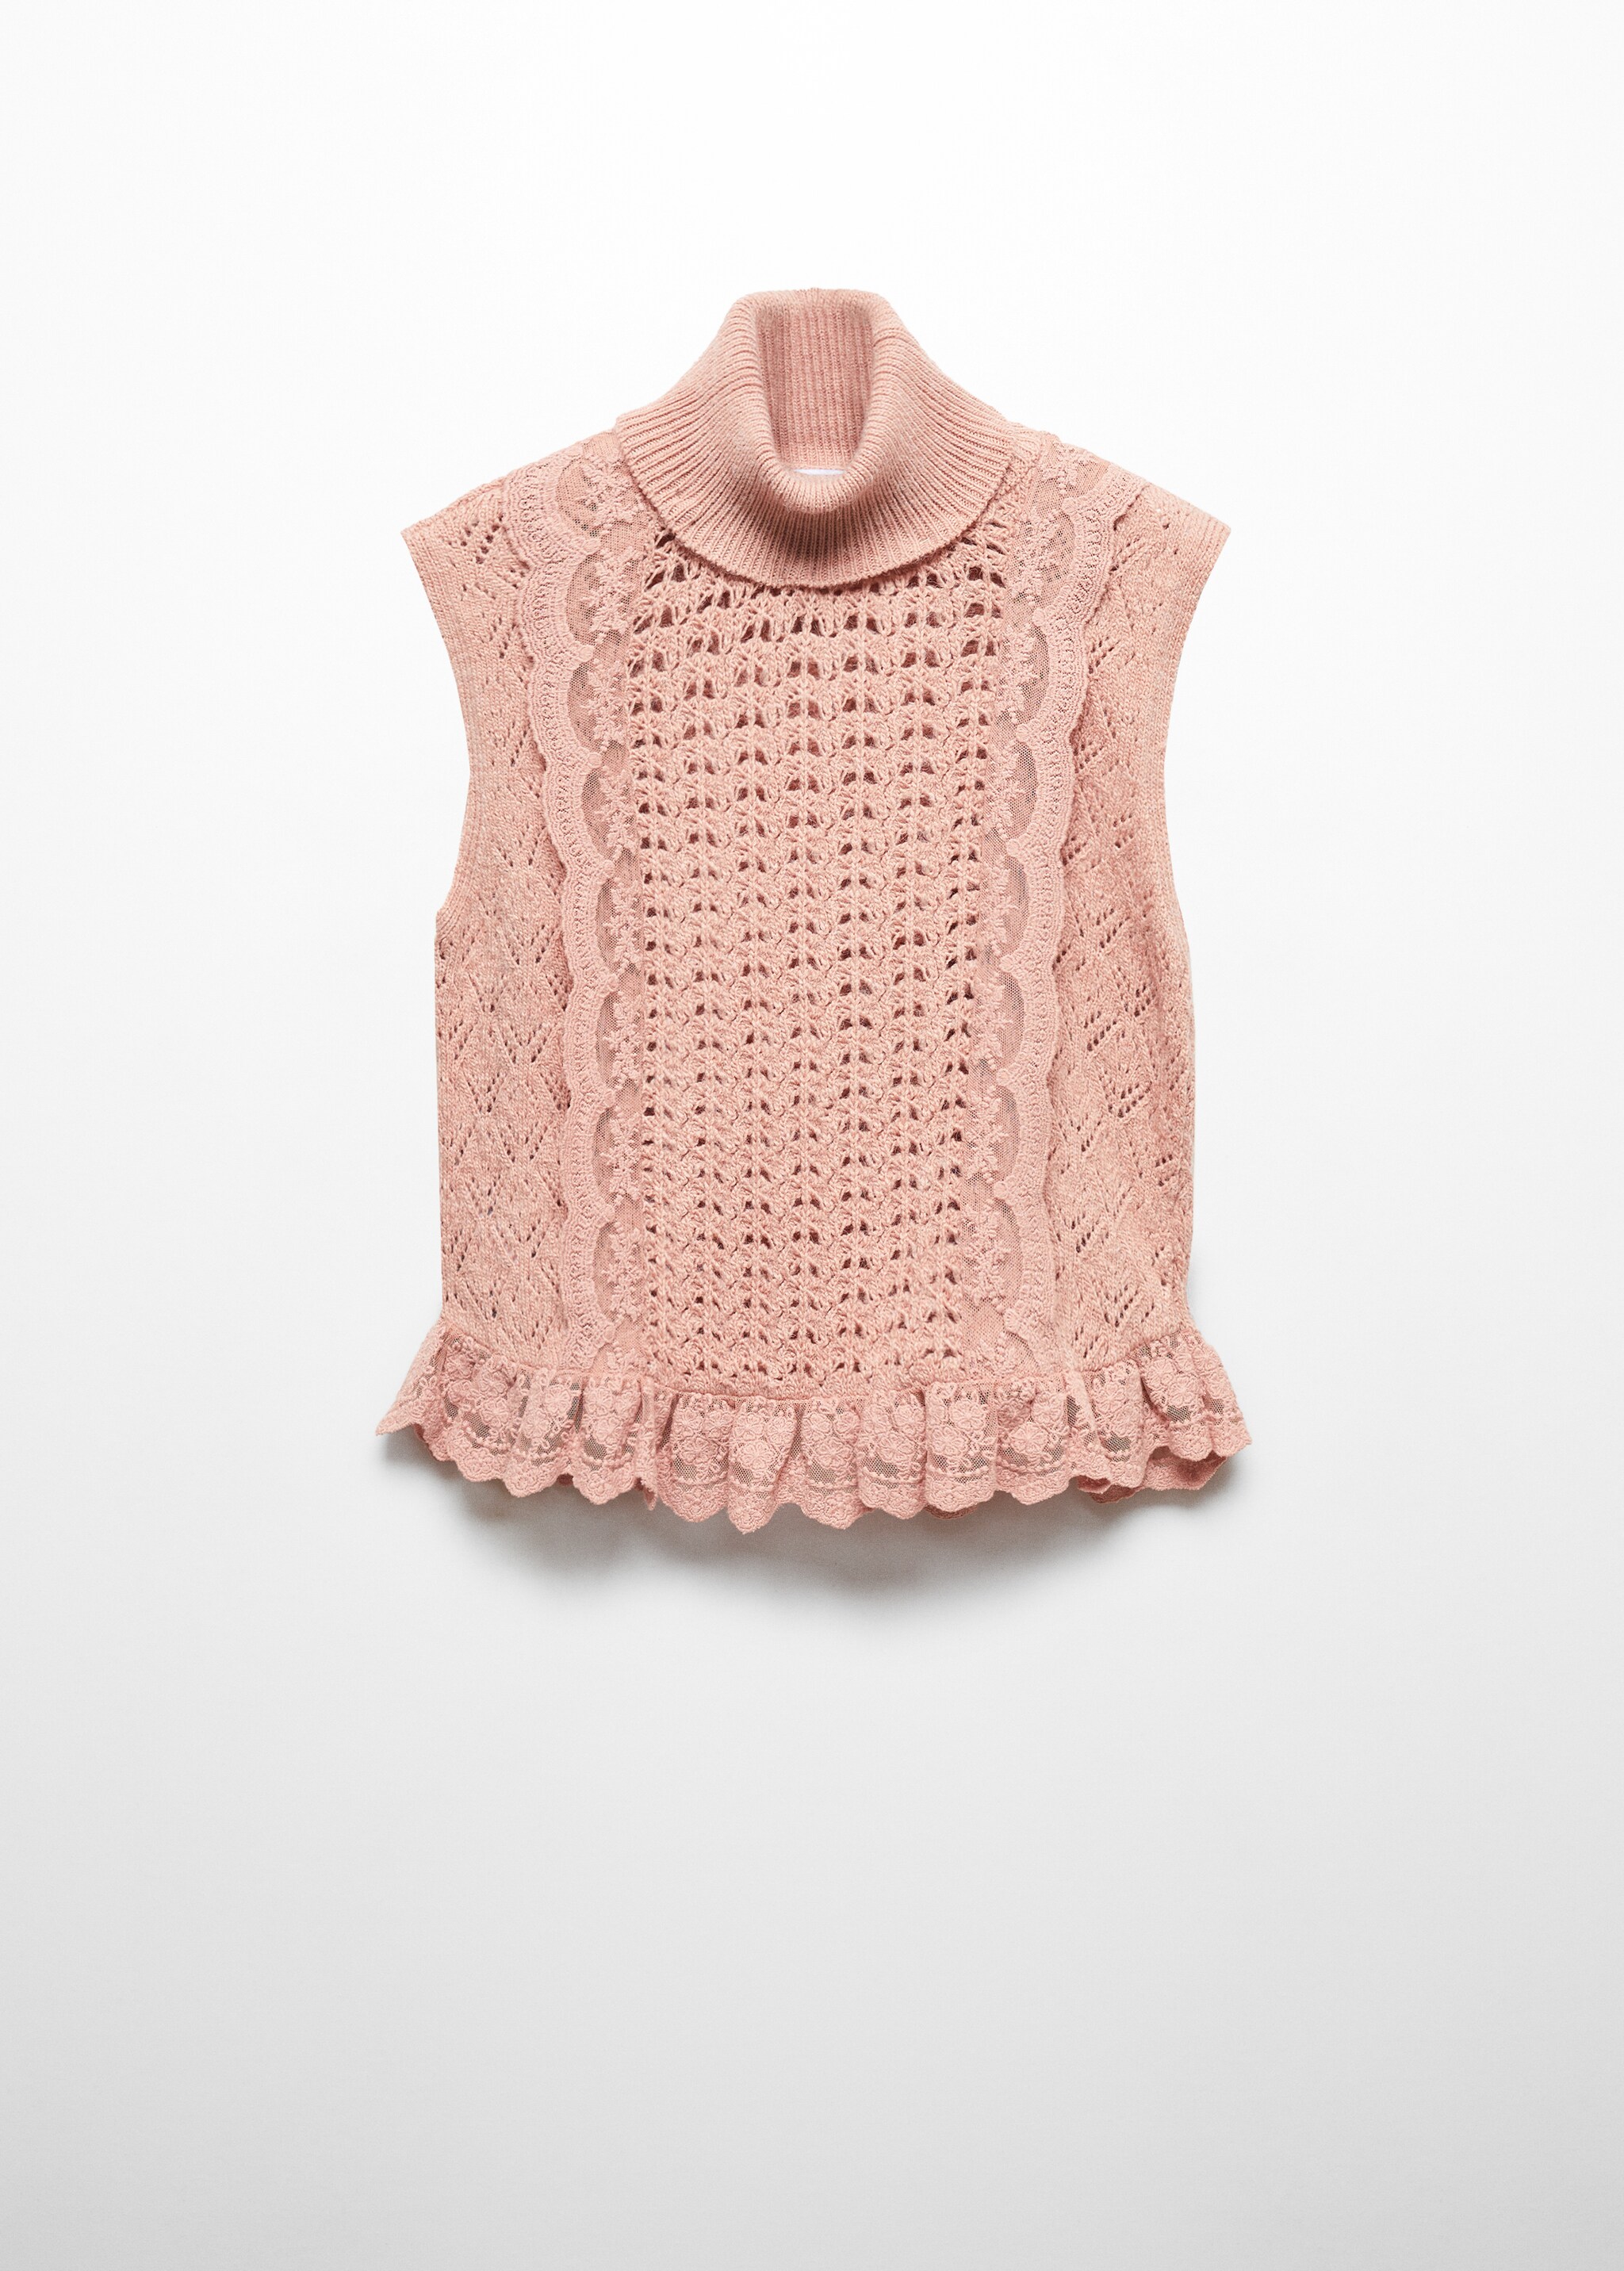 Ruffled openwork gilet - Article without model